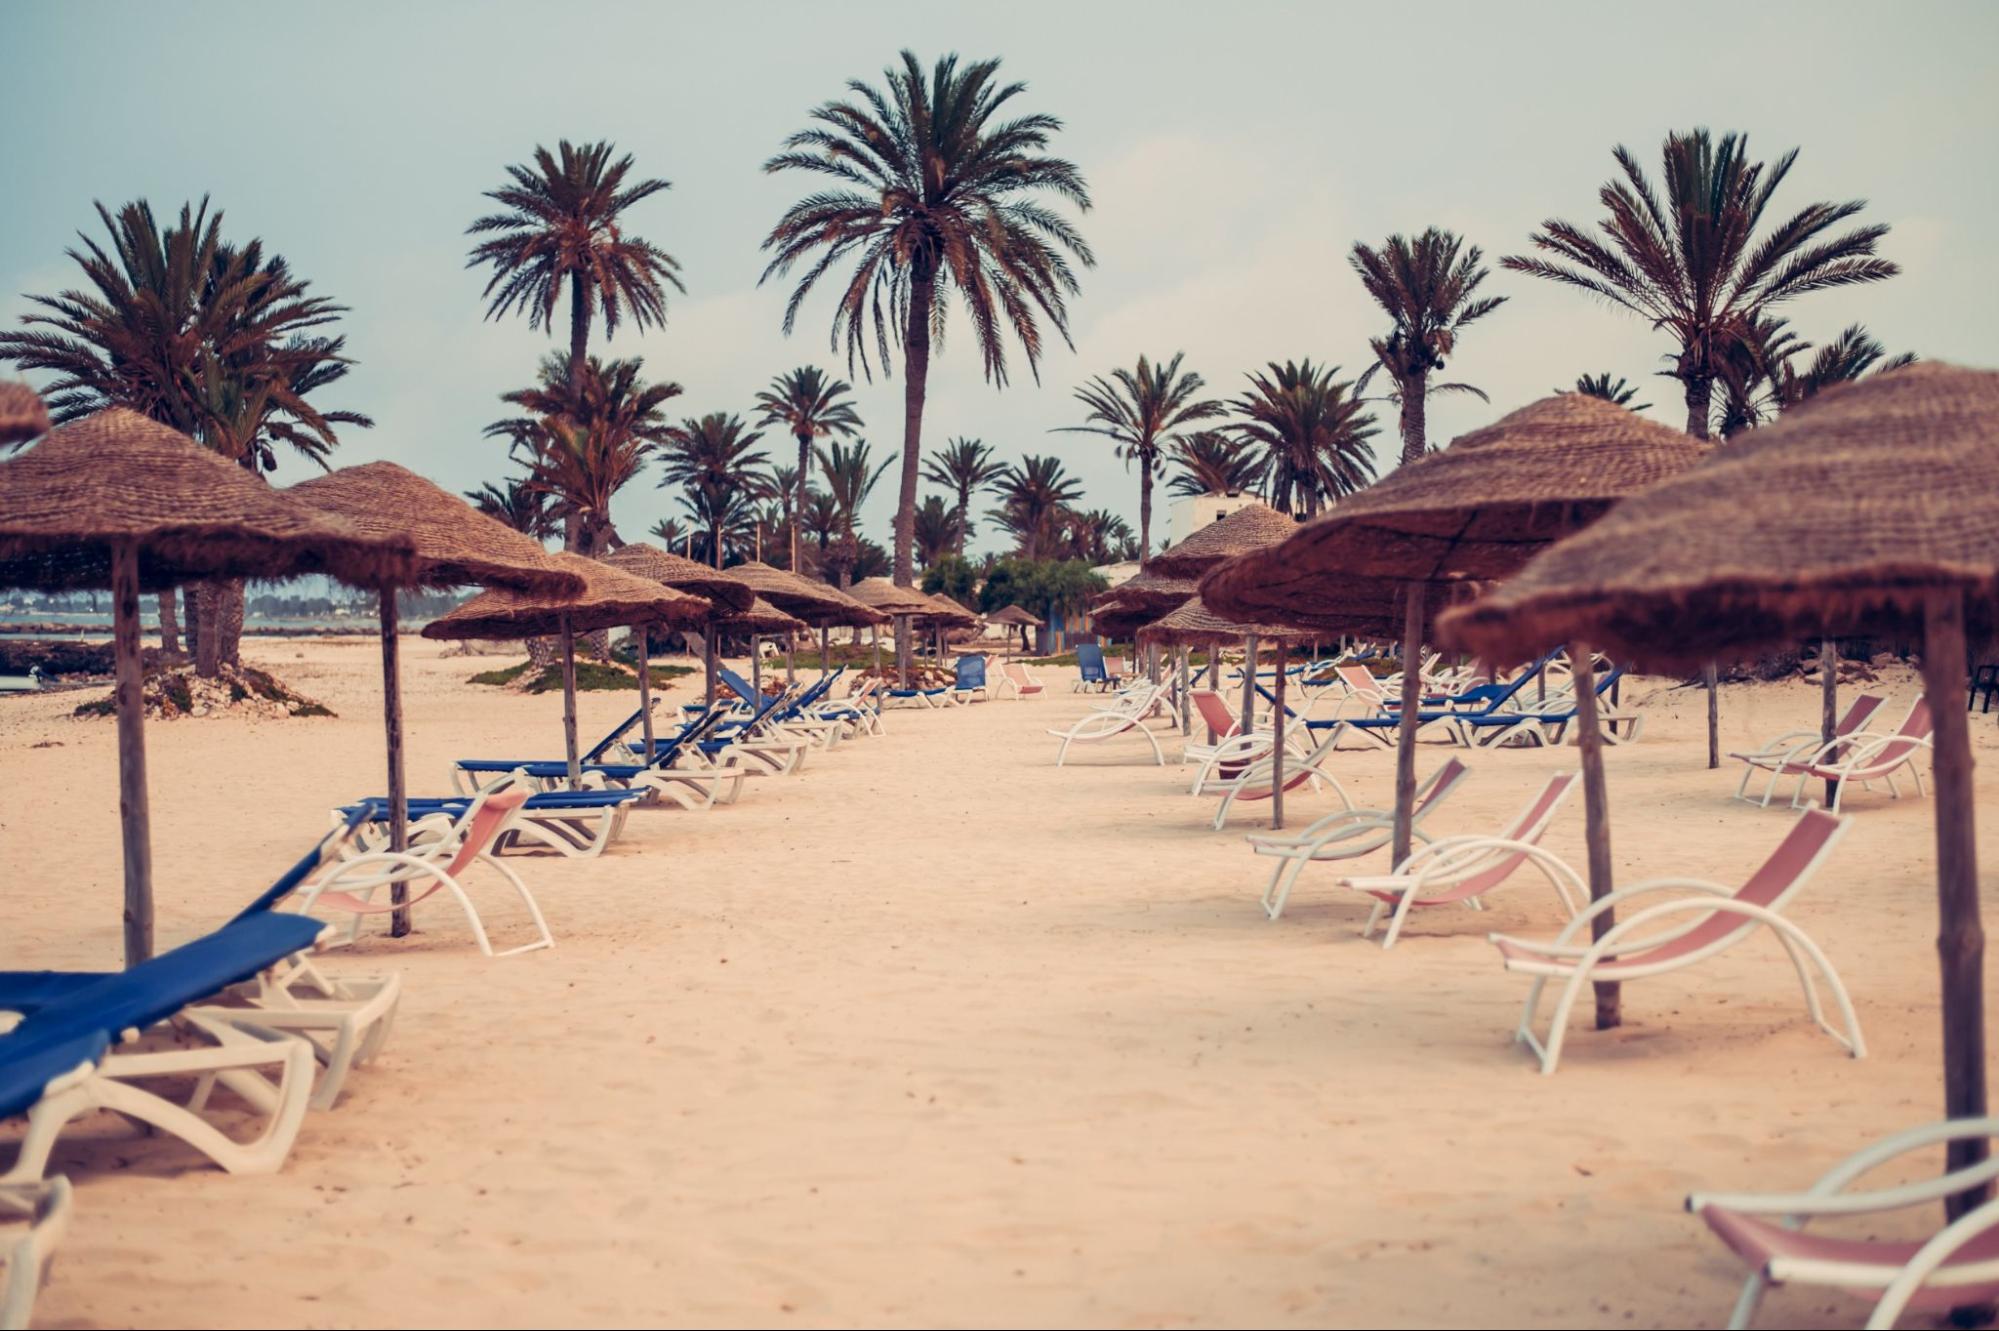 Snow-white sand and palm trees on the beach near sea or ocean in Tunisia